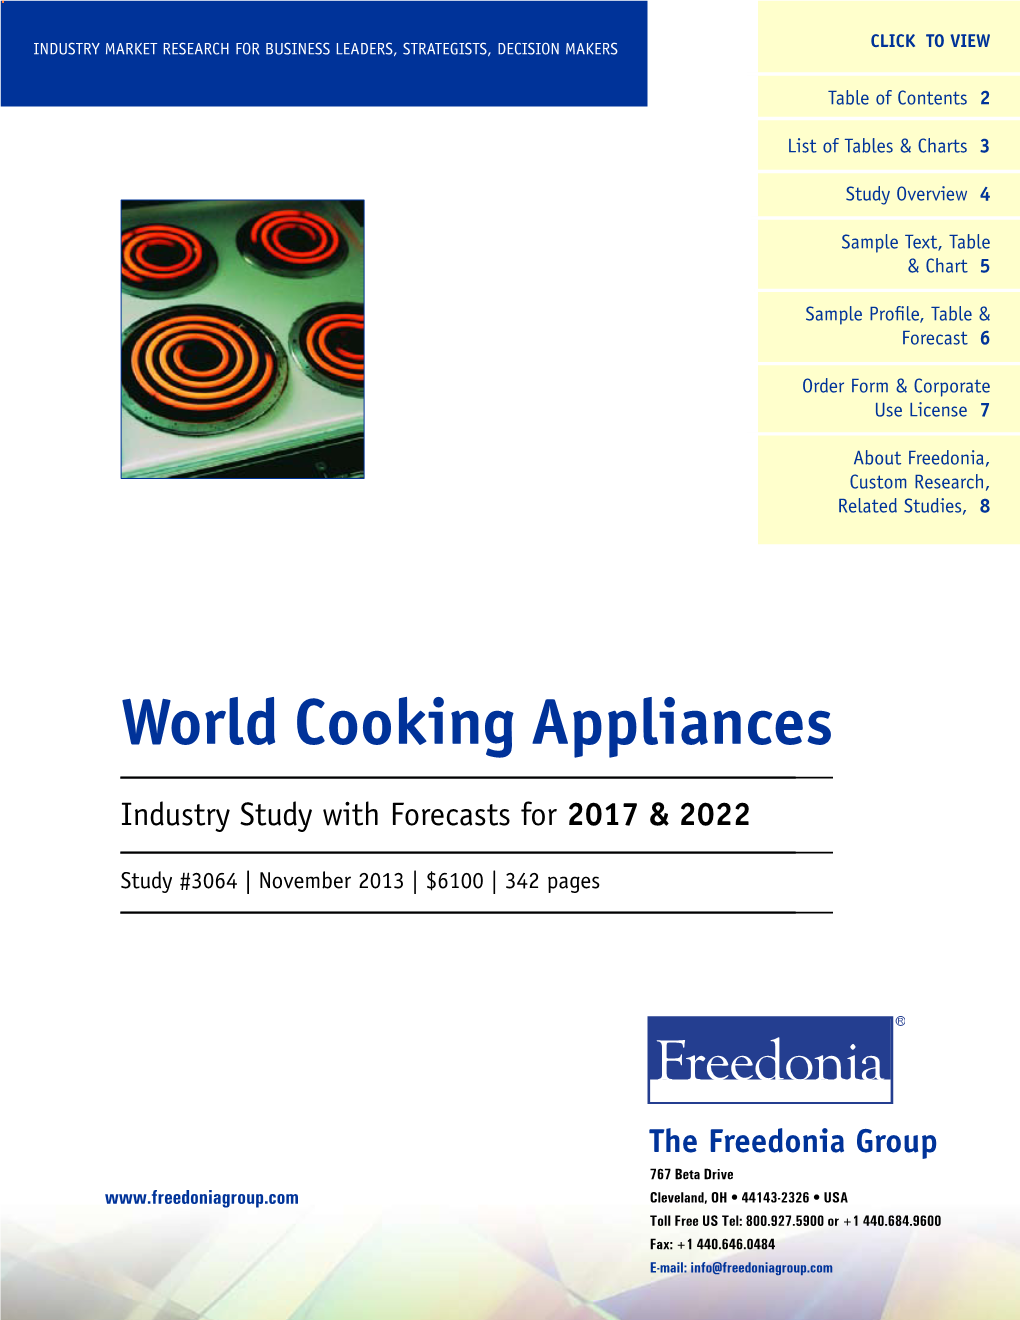 World Cooking Appliances